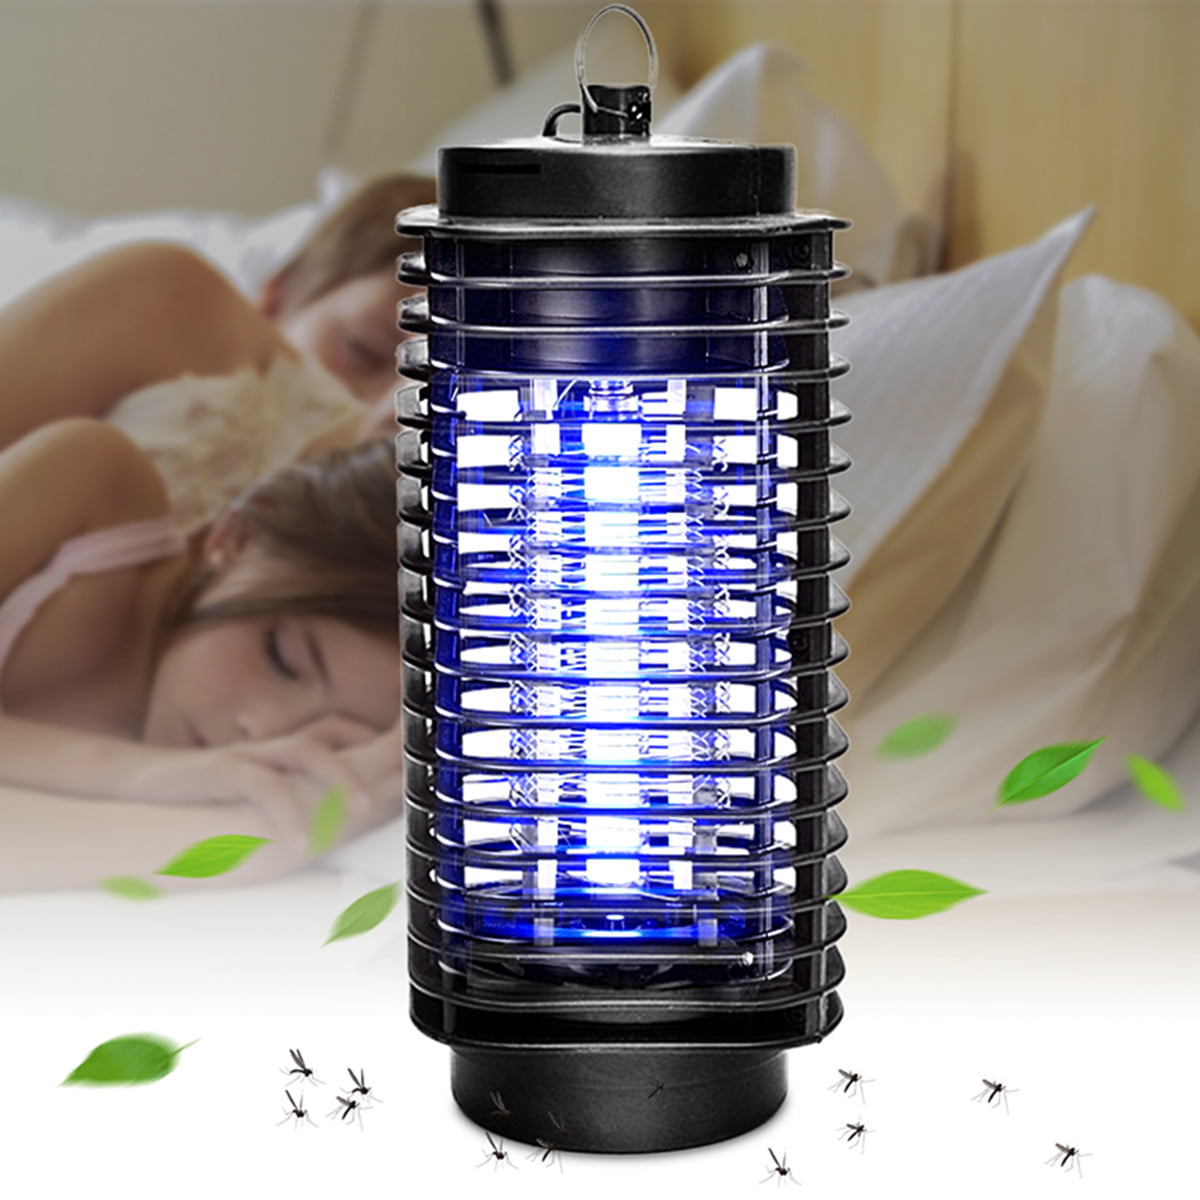 220v/110v Electric Mosquito Fly Bug Insect Zapper Killer With Trap Lamp P_SH